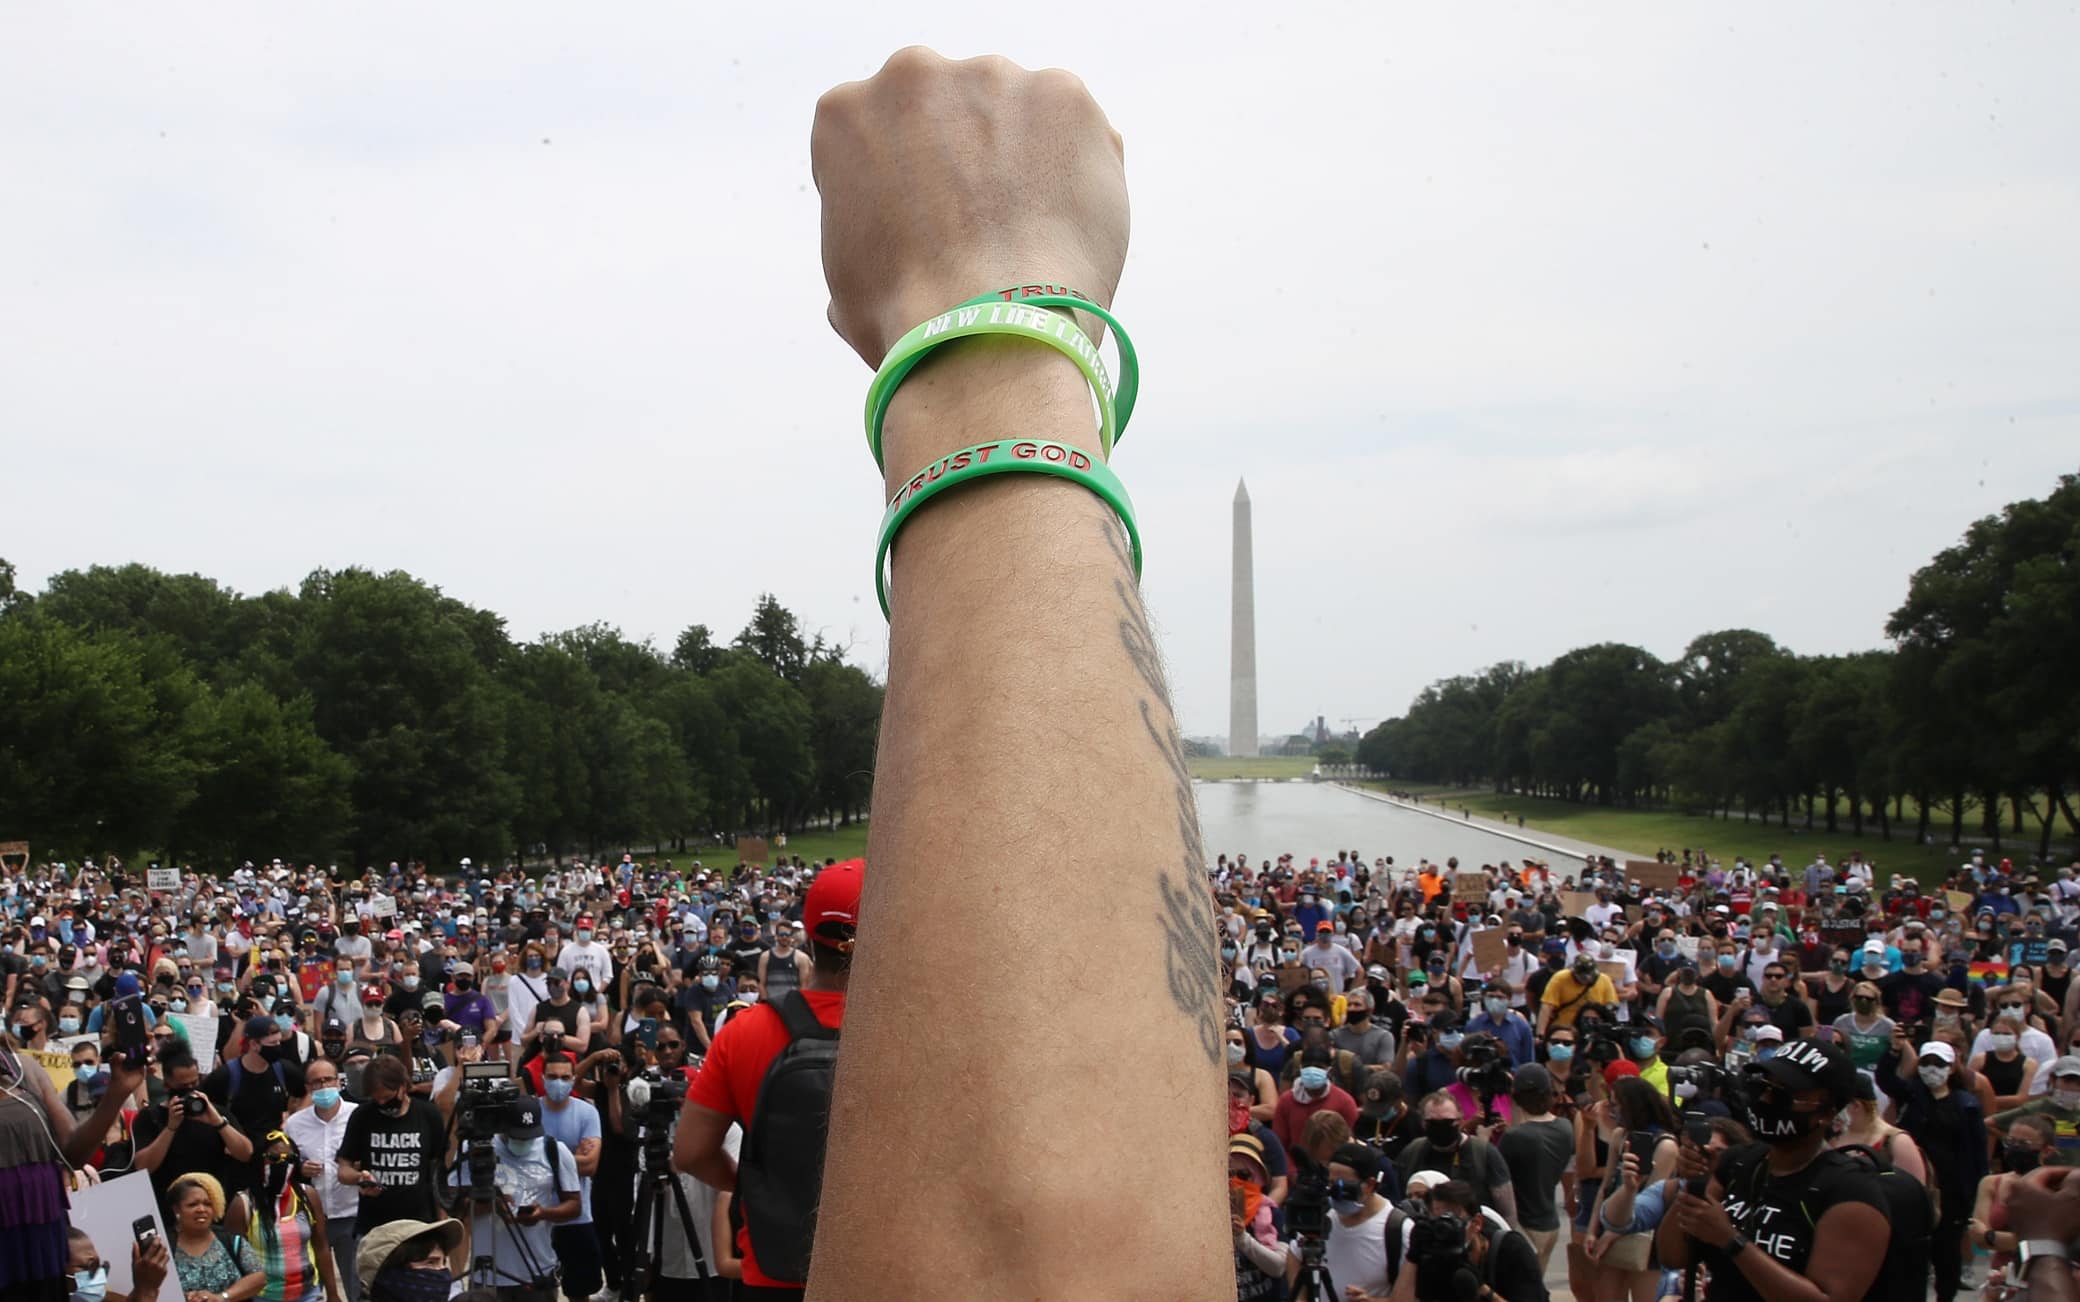 WASHINGTON, DC - JUNE 06: Demonstrators gather in front of the Lincoln Memorial during a protest against police brutality and racism on June 6, 2020 in Washington, DC. This is the 12th day of protests with thousands of people descending on the city to peacefully demonstrate in the wake of the death of George Floyd, a black man who was killed in police custody in Minneapolis on May 25. (Photo by Win McNamee/Getty Images)